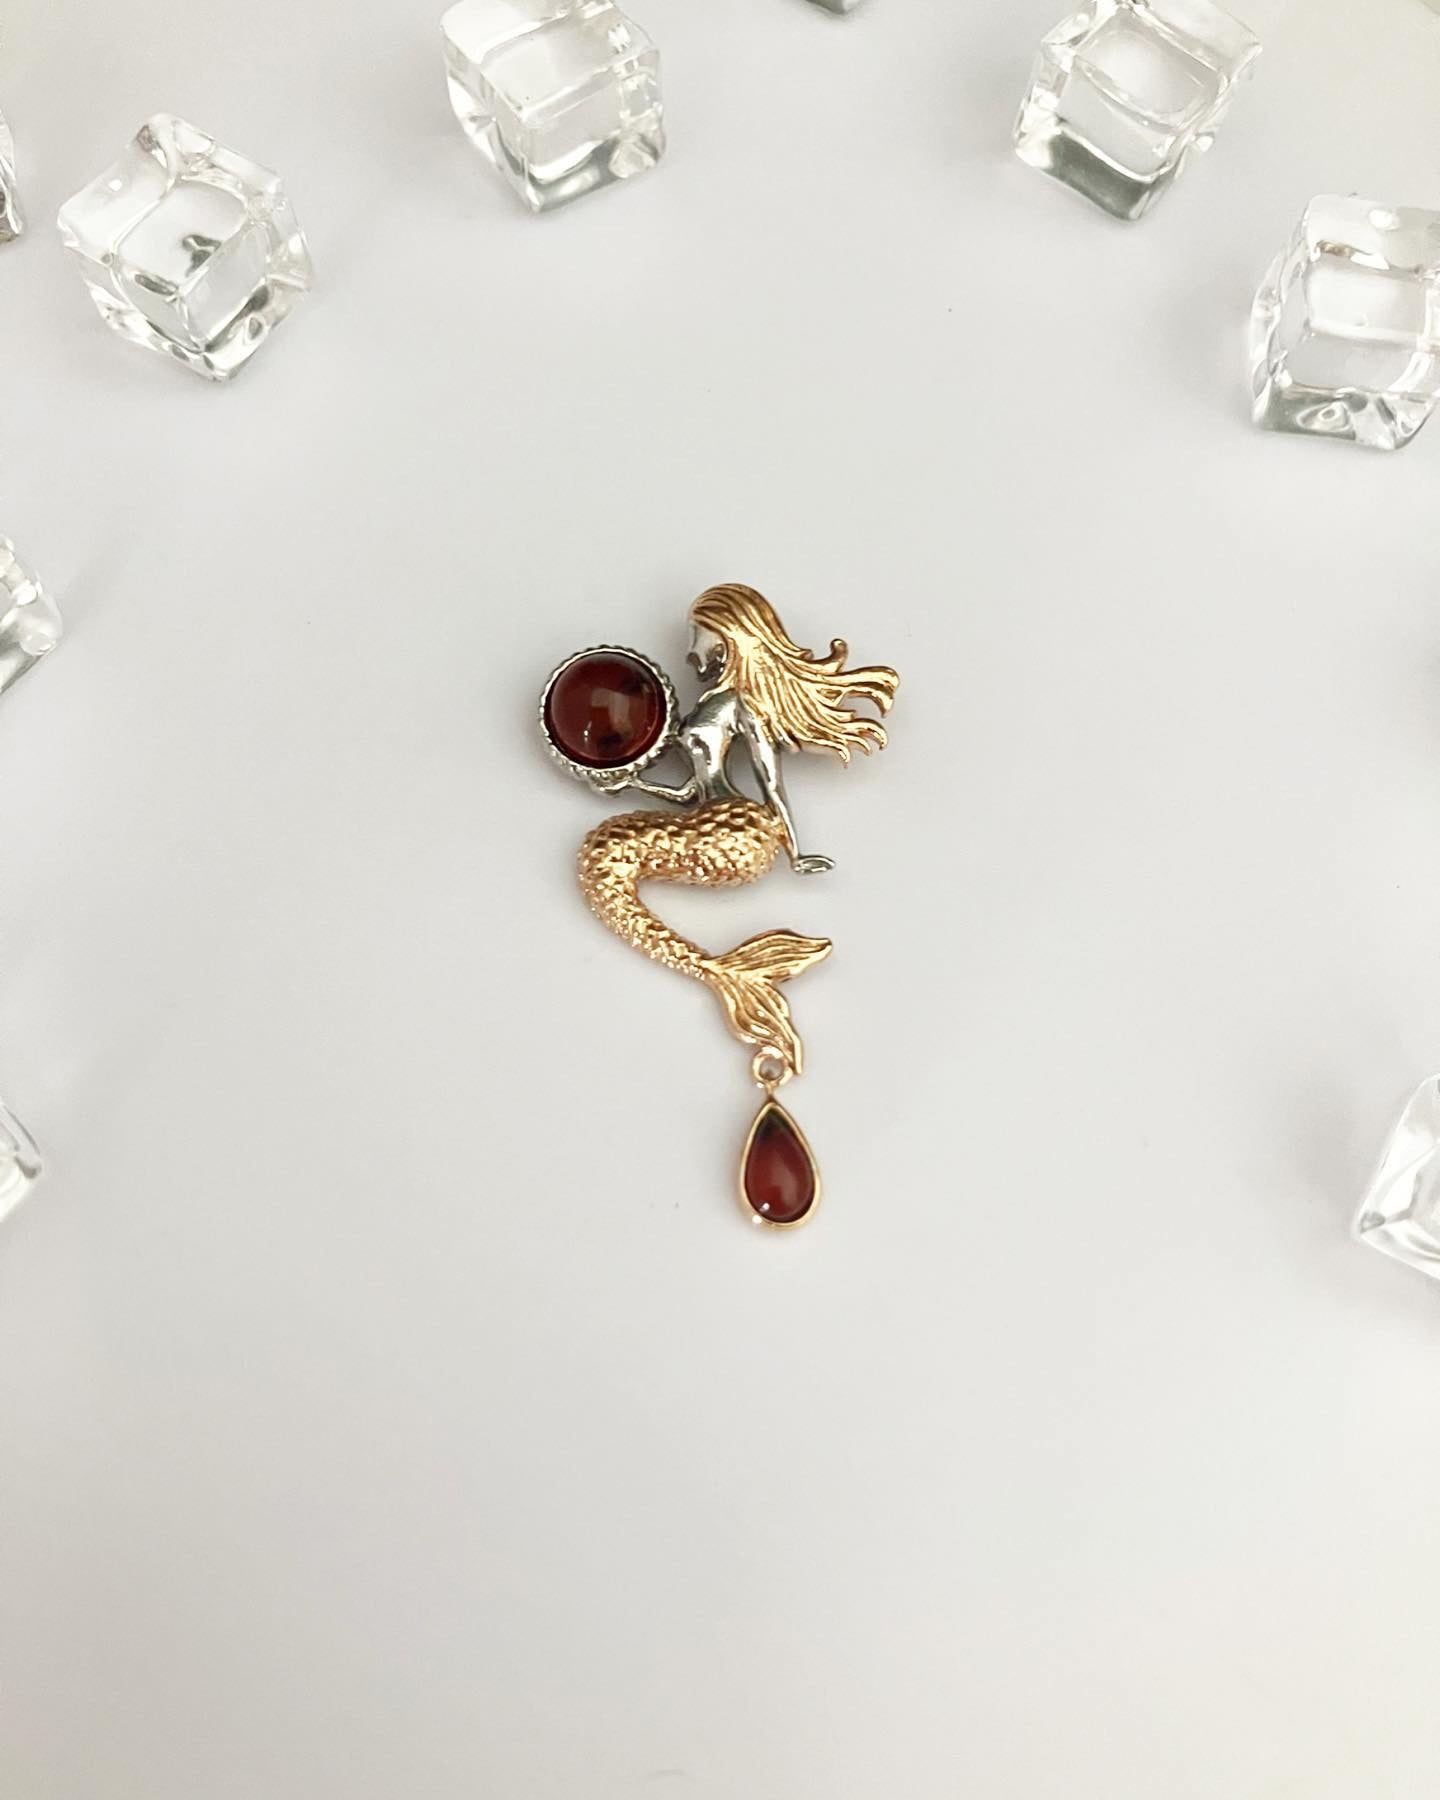 Pendant silver 925 samples with gilding and natural amber "Mermaid"